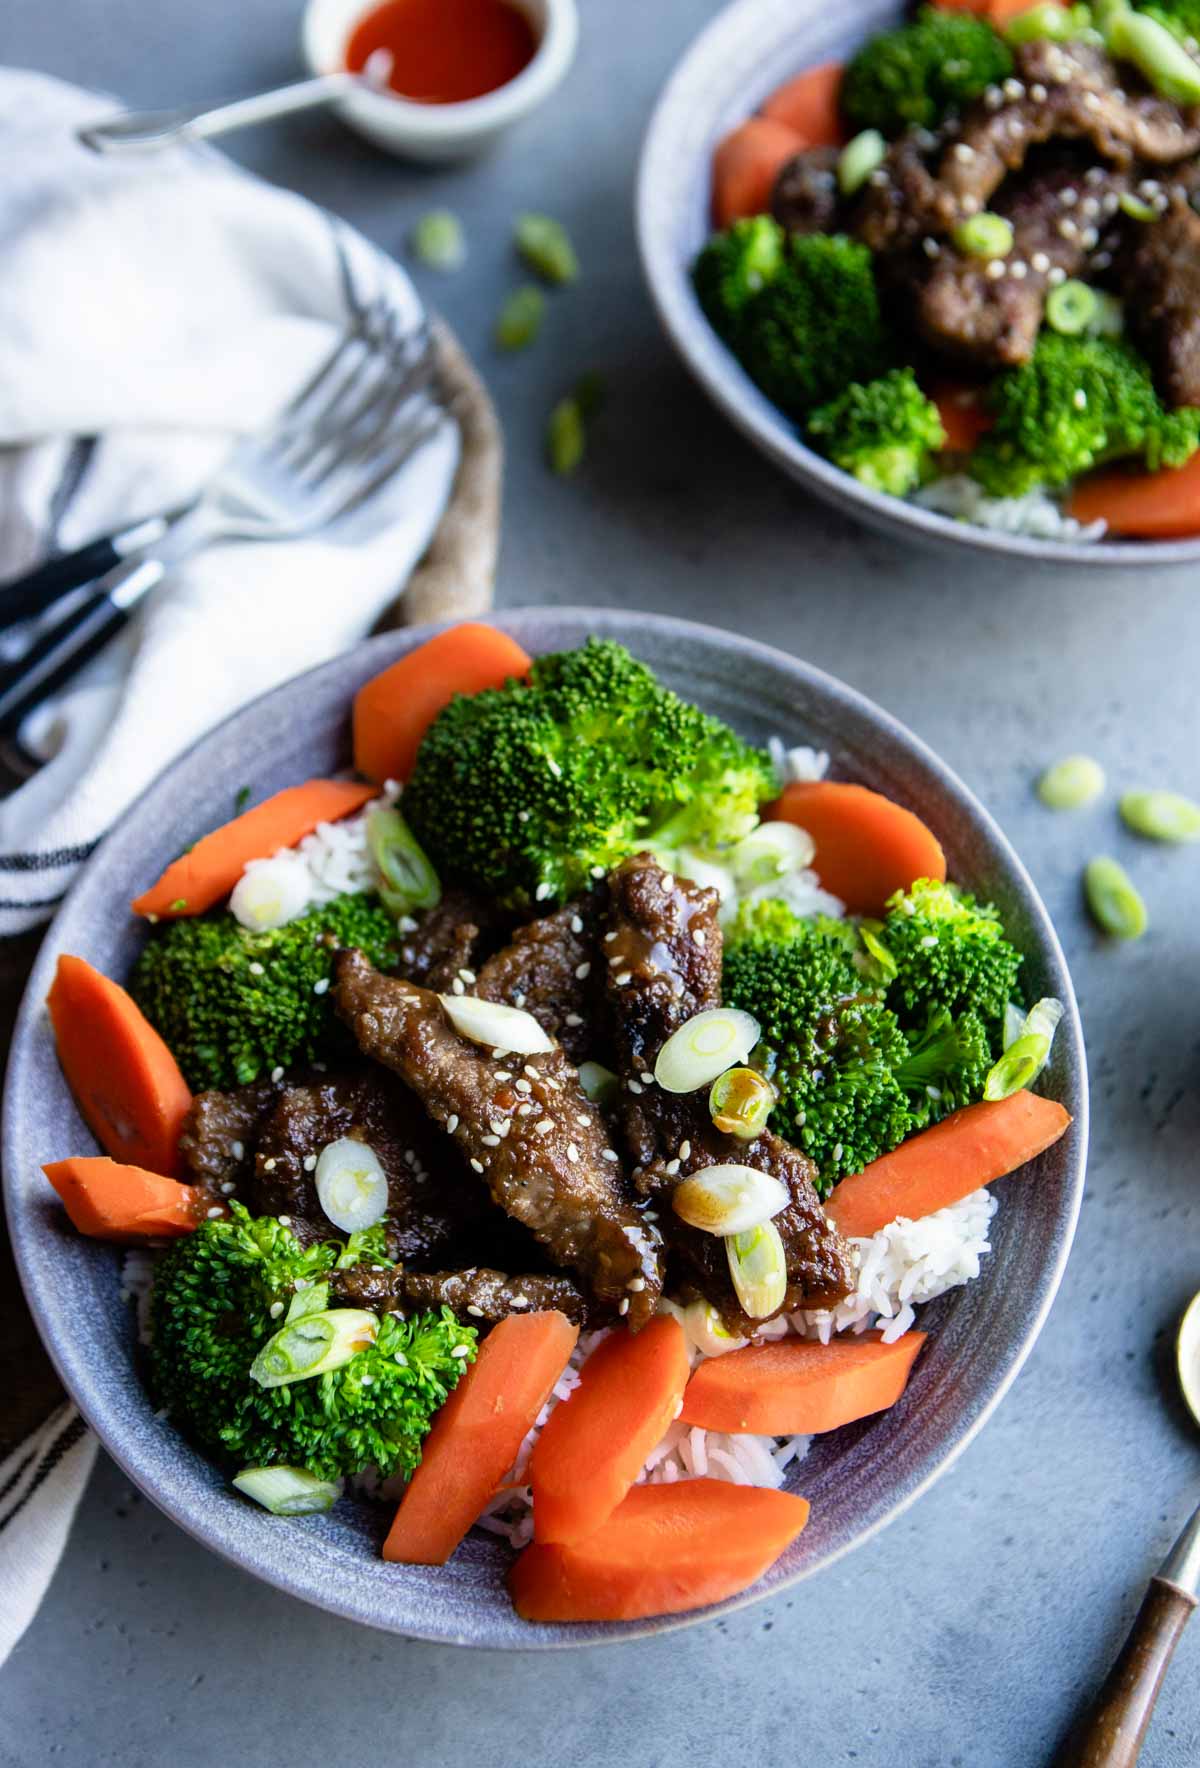 2 beef teriyaki bowls filled with white rice and steamed vegetables in gray bowls